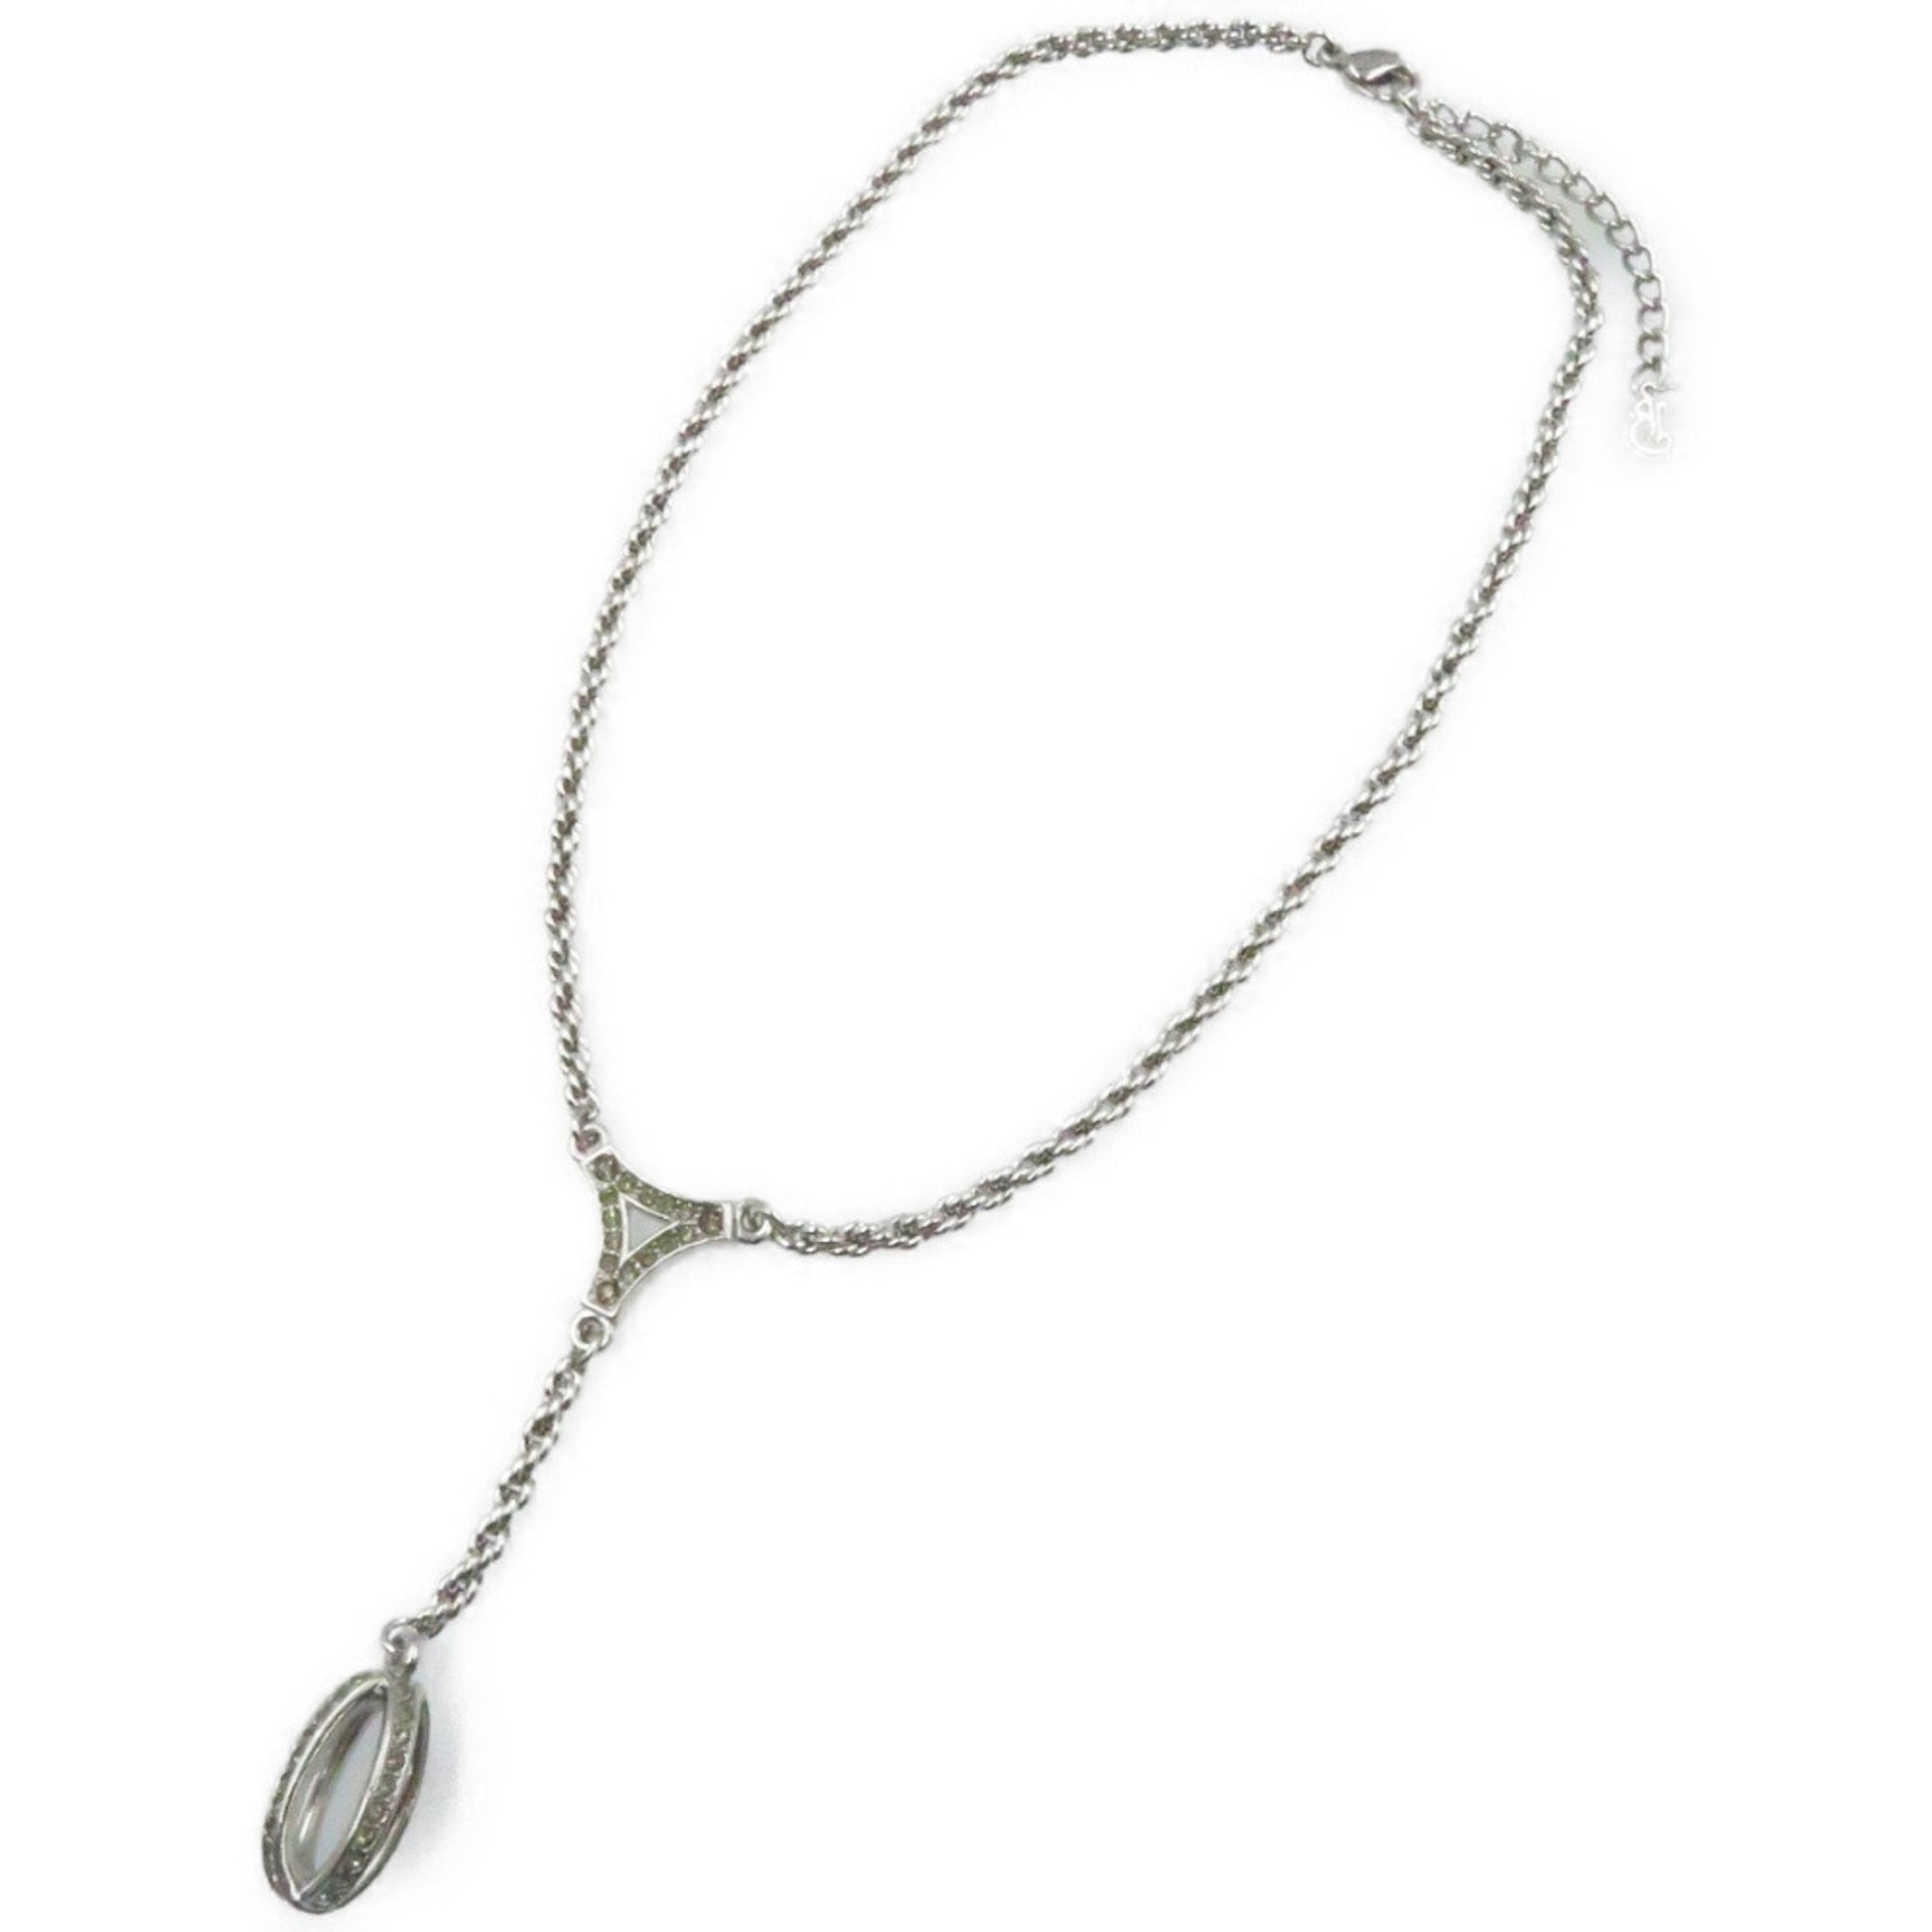 Burberry Stone Silver Plated Necklace 0225 BURBERRY